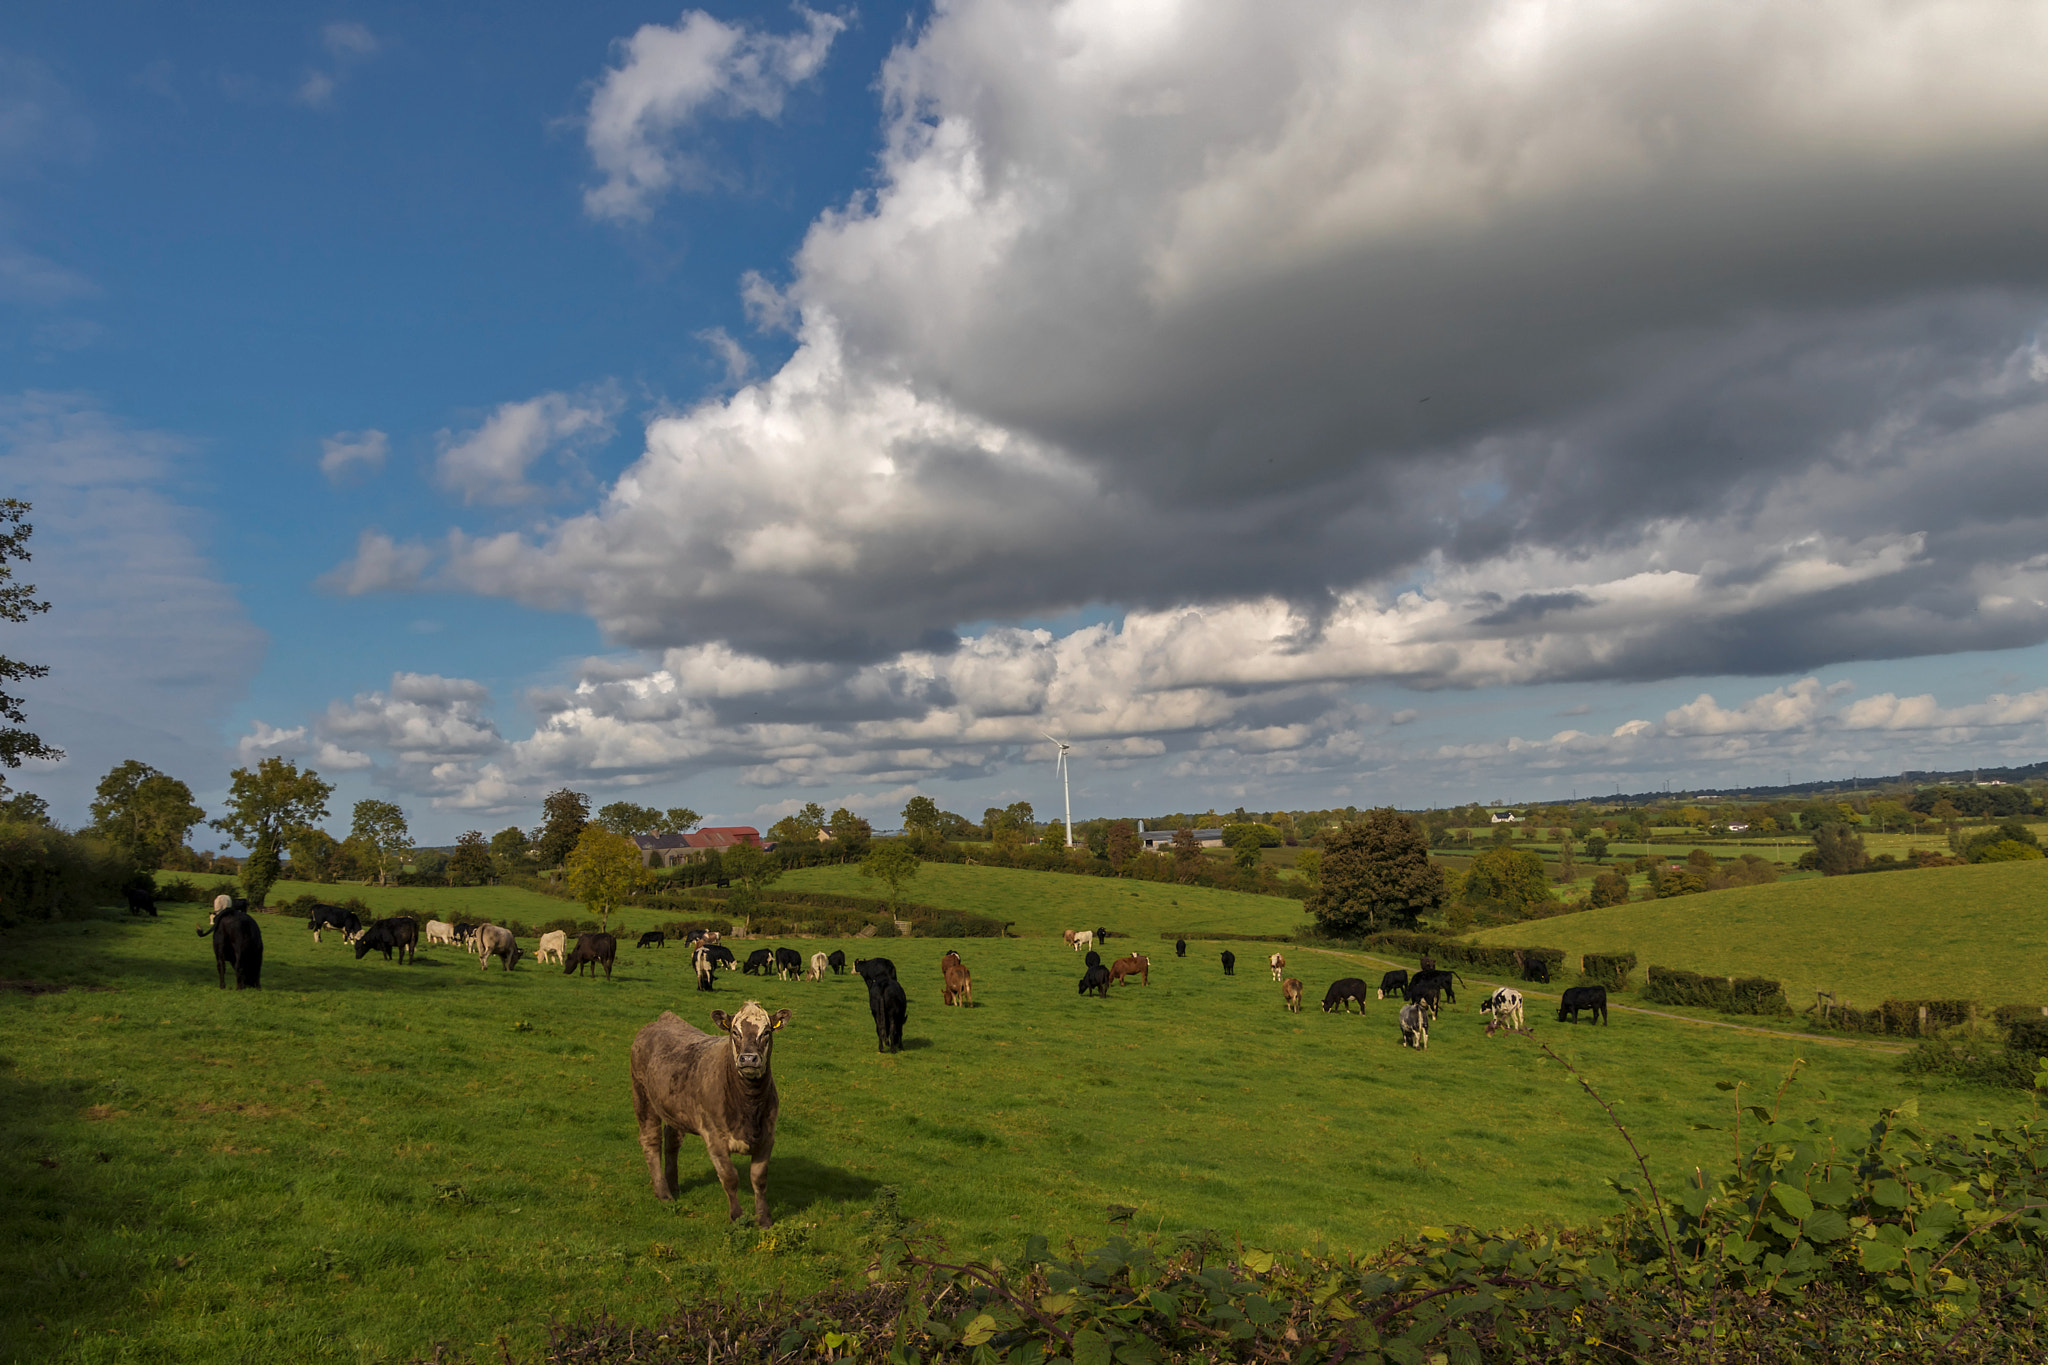 Canon EOS 80D + Sigma 17-70mm F2.8-4 DC Macro OS HSM | C sample photo. Cloud over the cattle photography